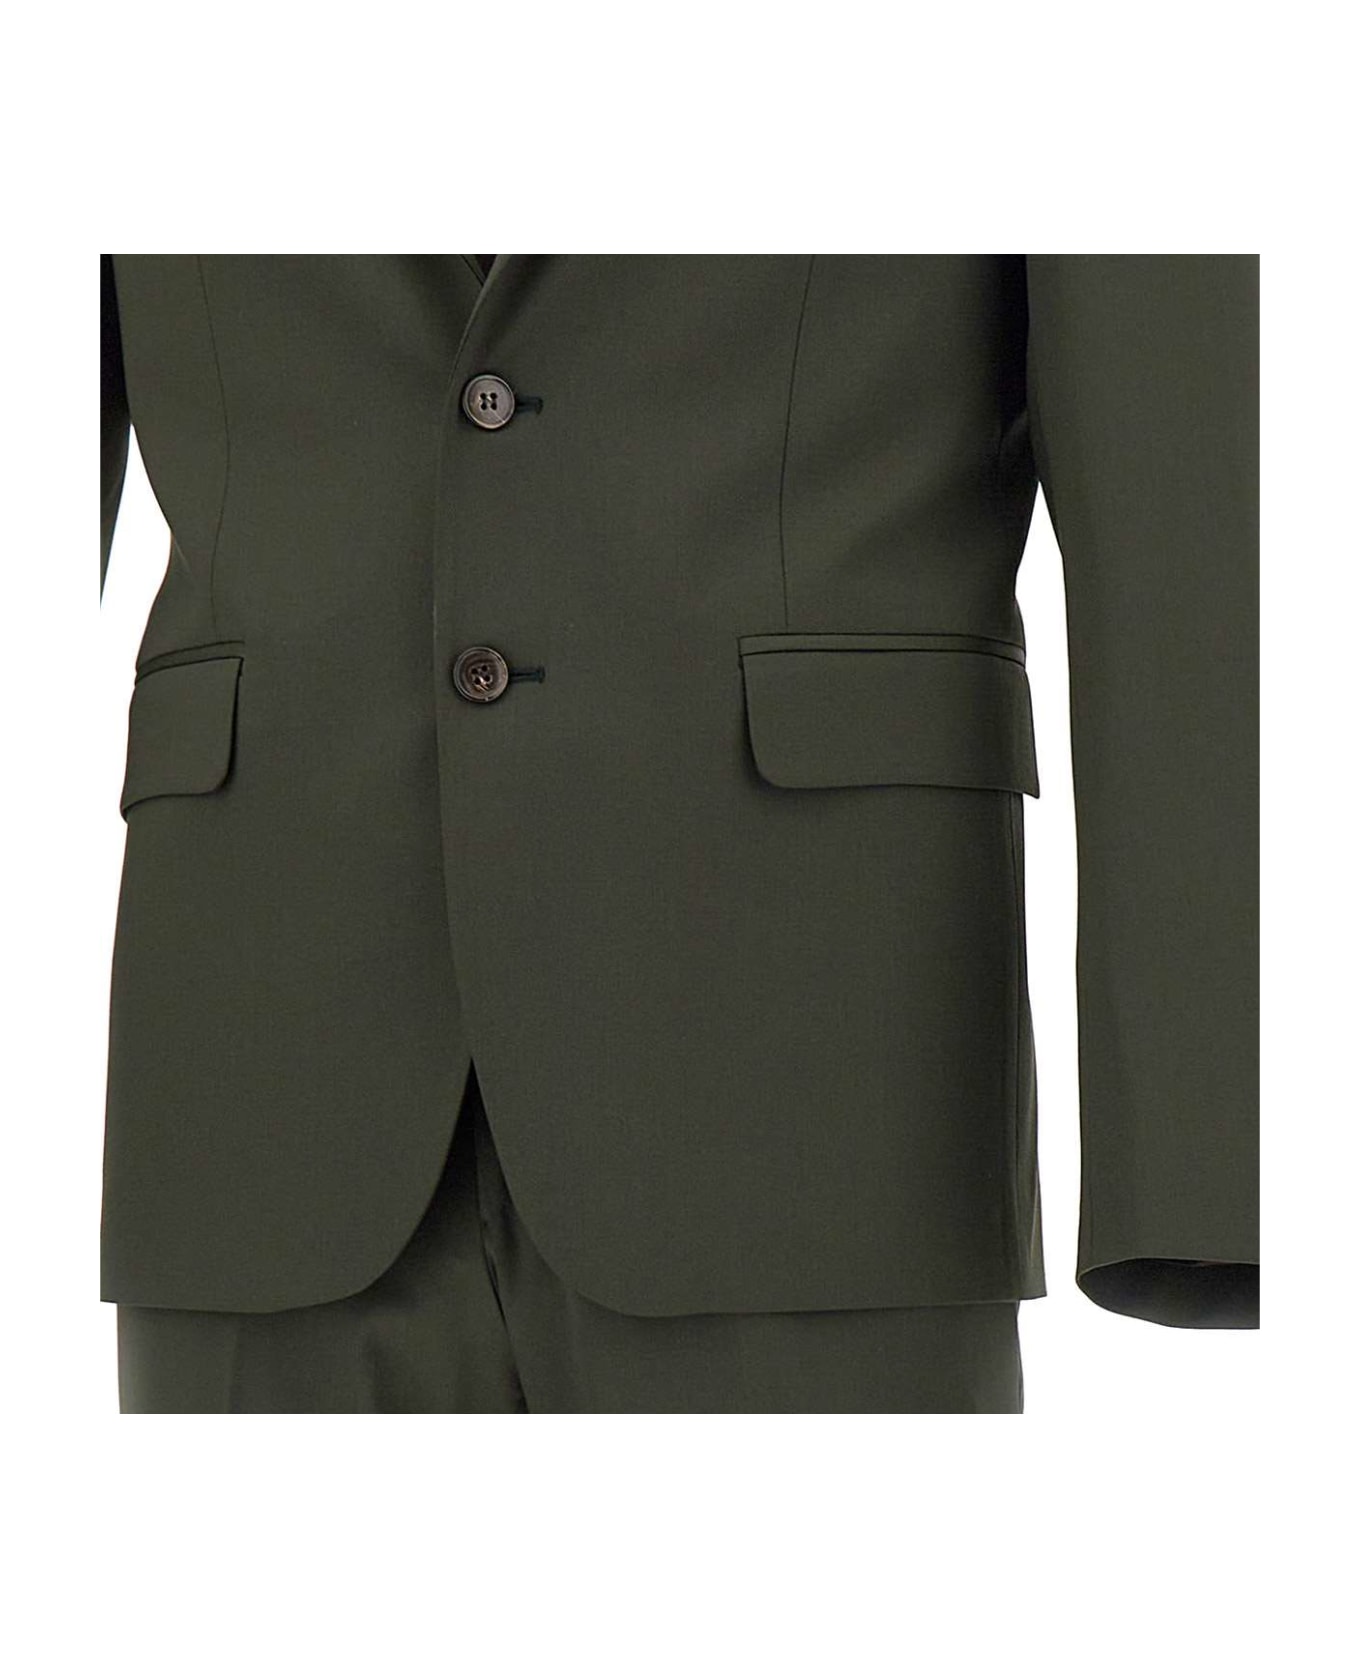 Brian Dales "ga87" Suit Two-piece Cool Wool - GREEN